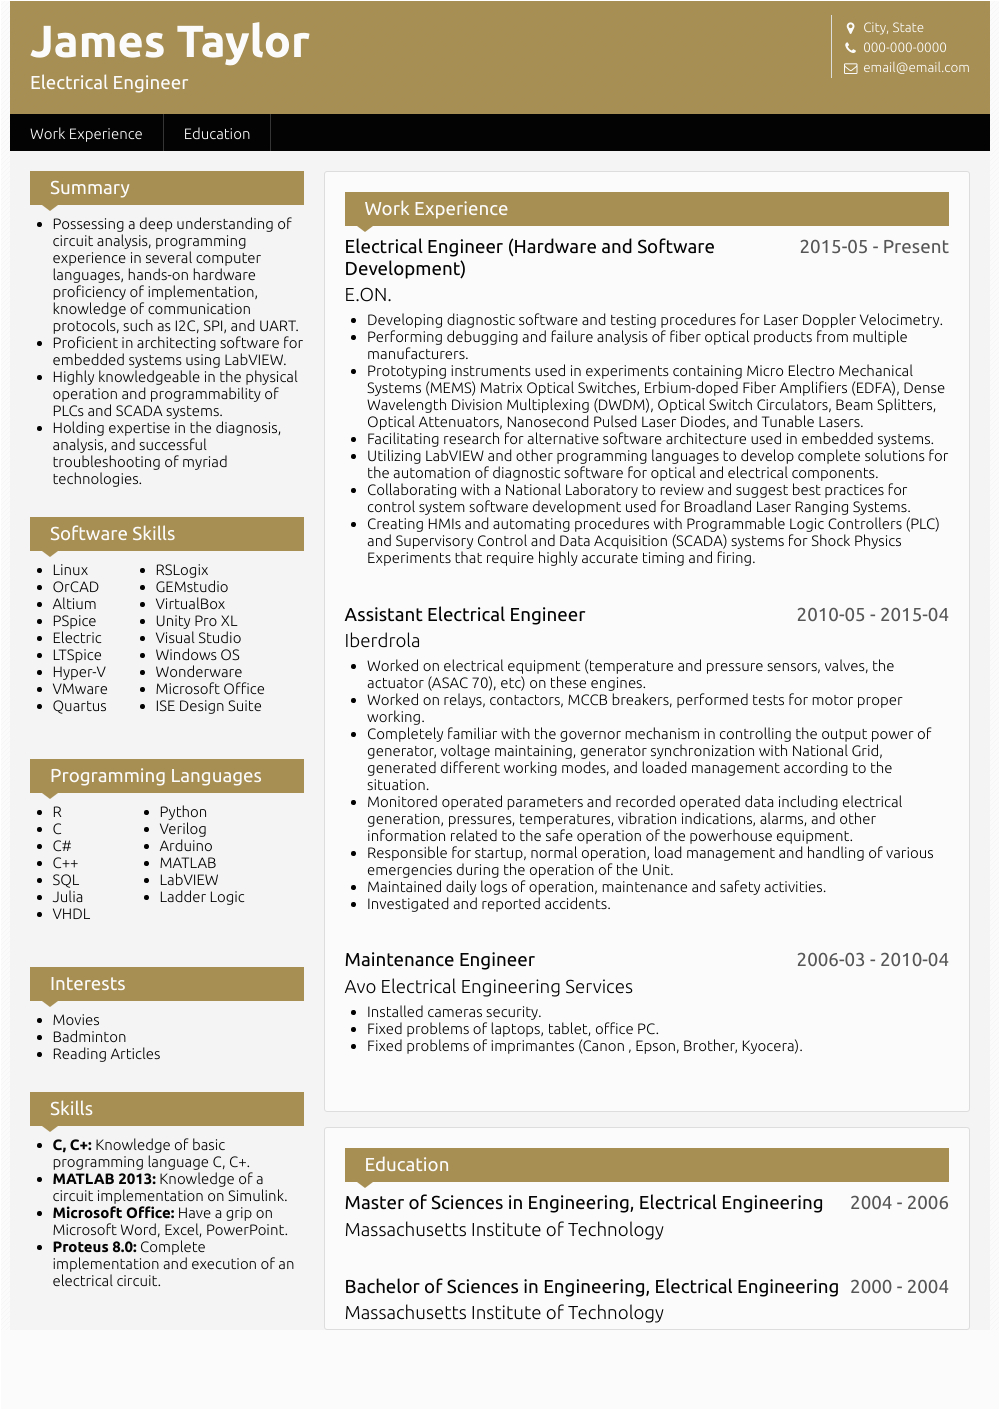 Sample Resume for Electrical Engineering Student Electrical Engineer Resume Samples and Templates